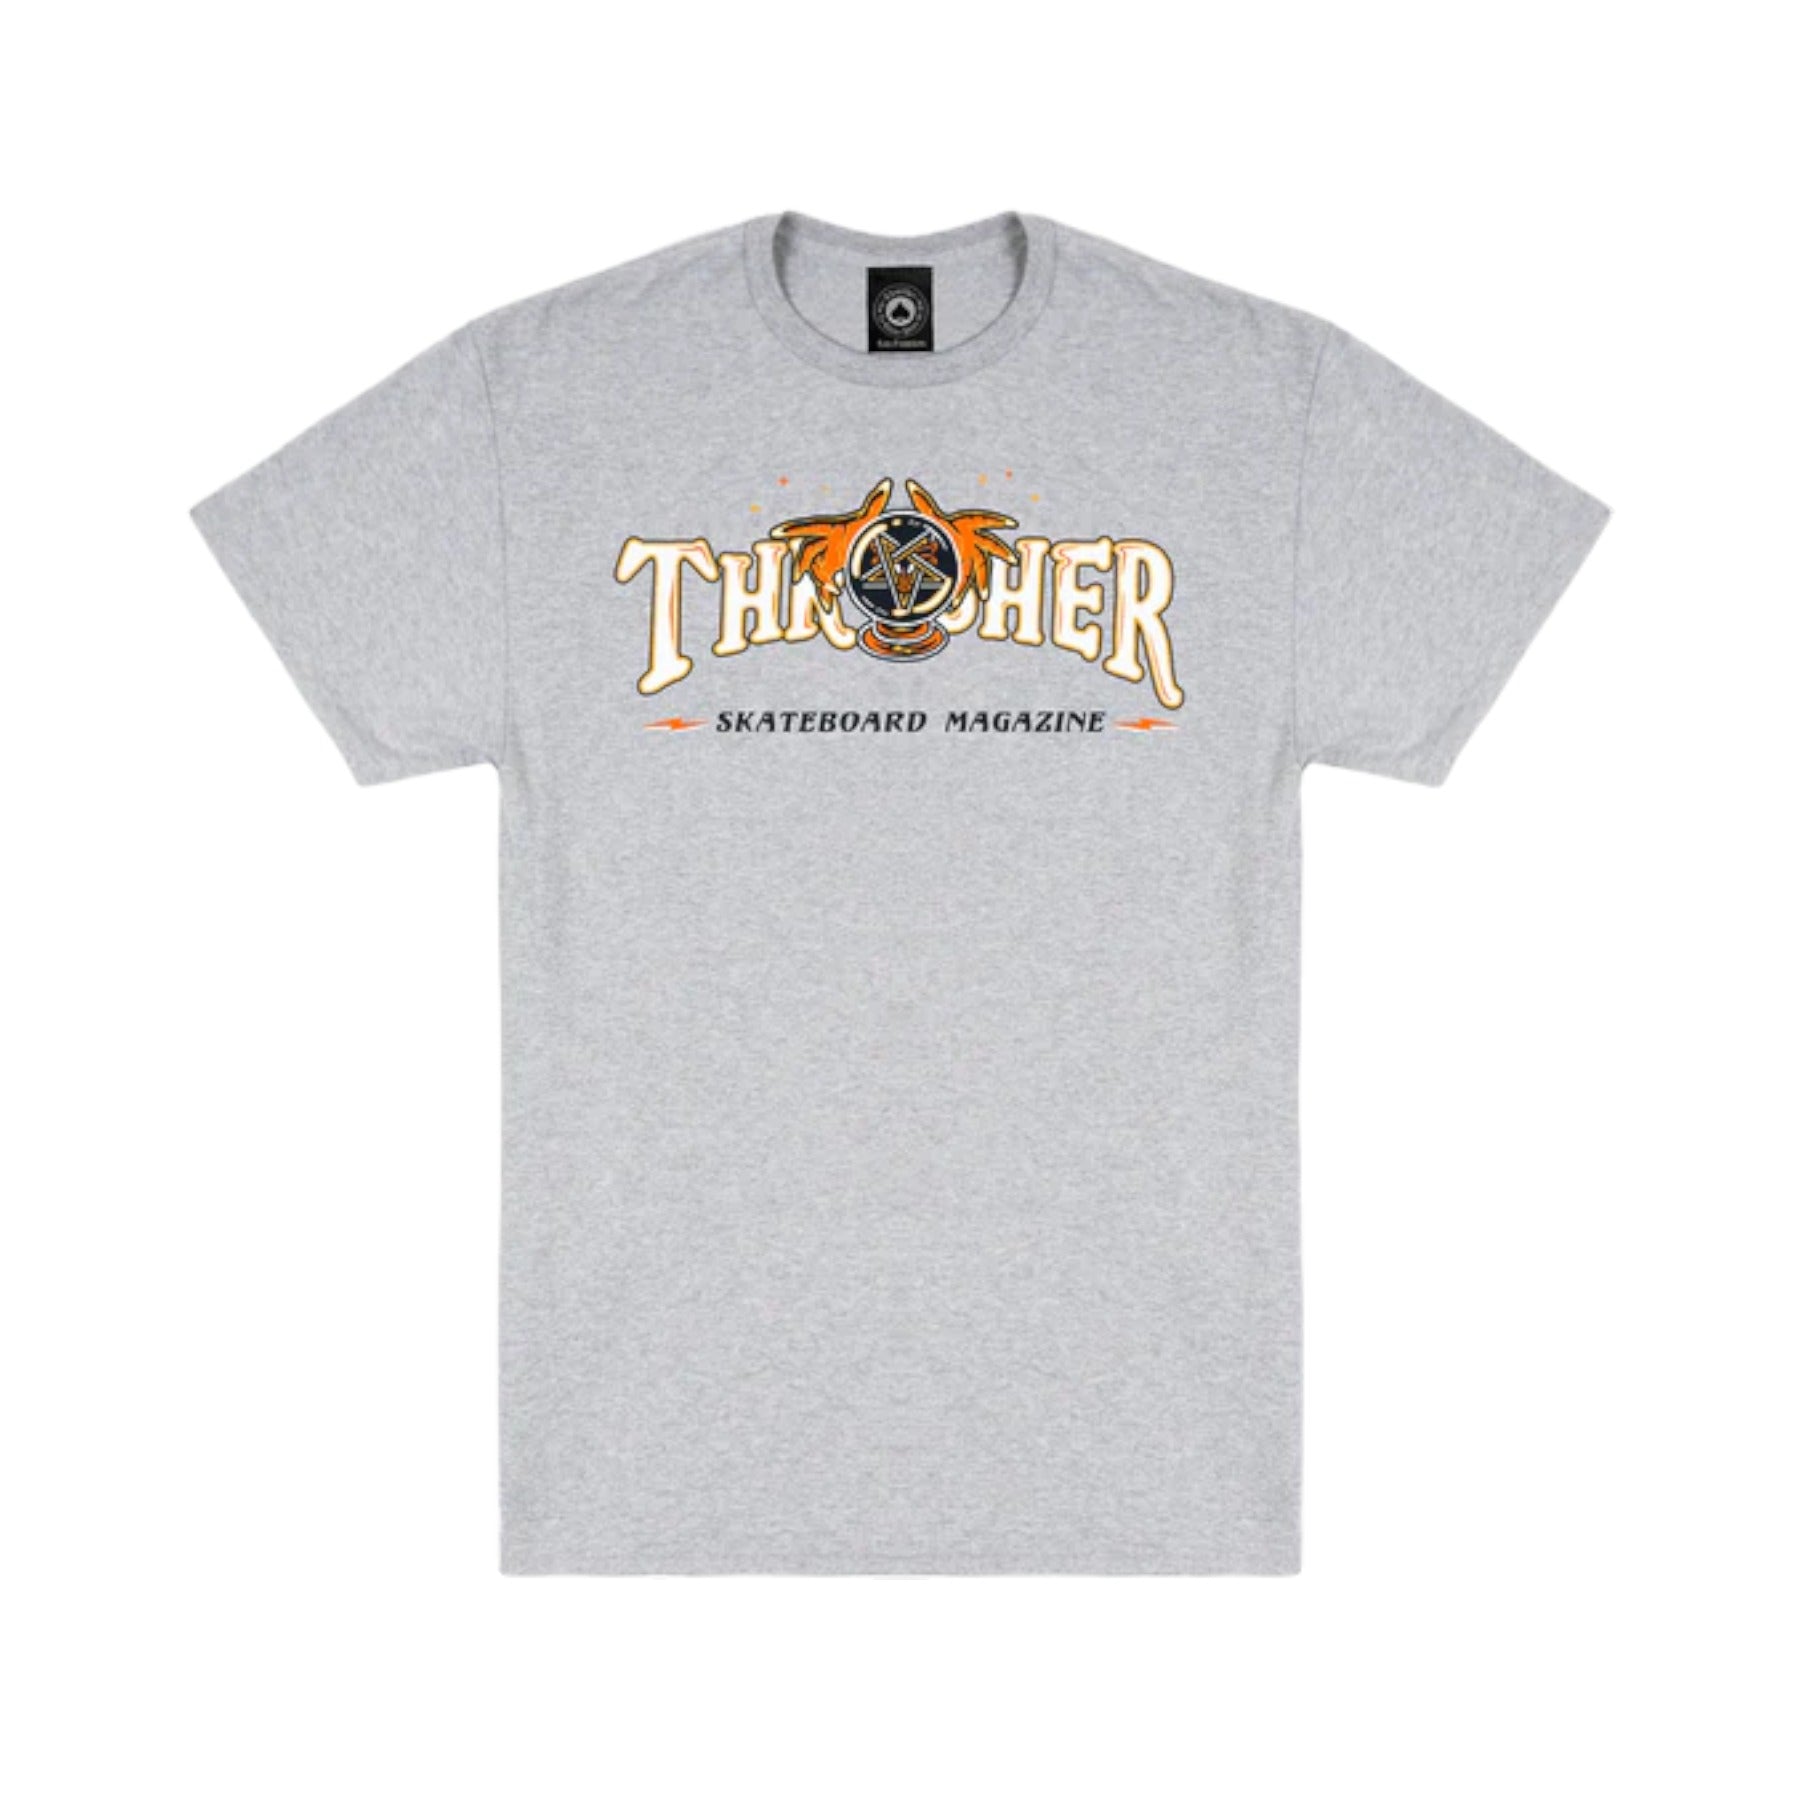 Thrasher Fortune S/S Tee - Grey